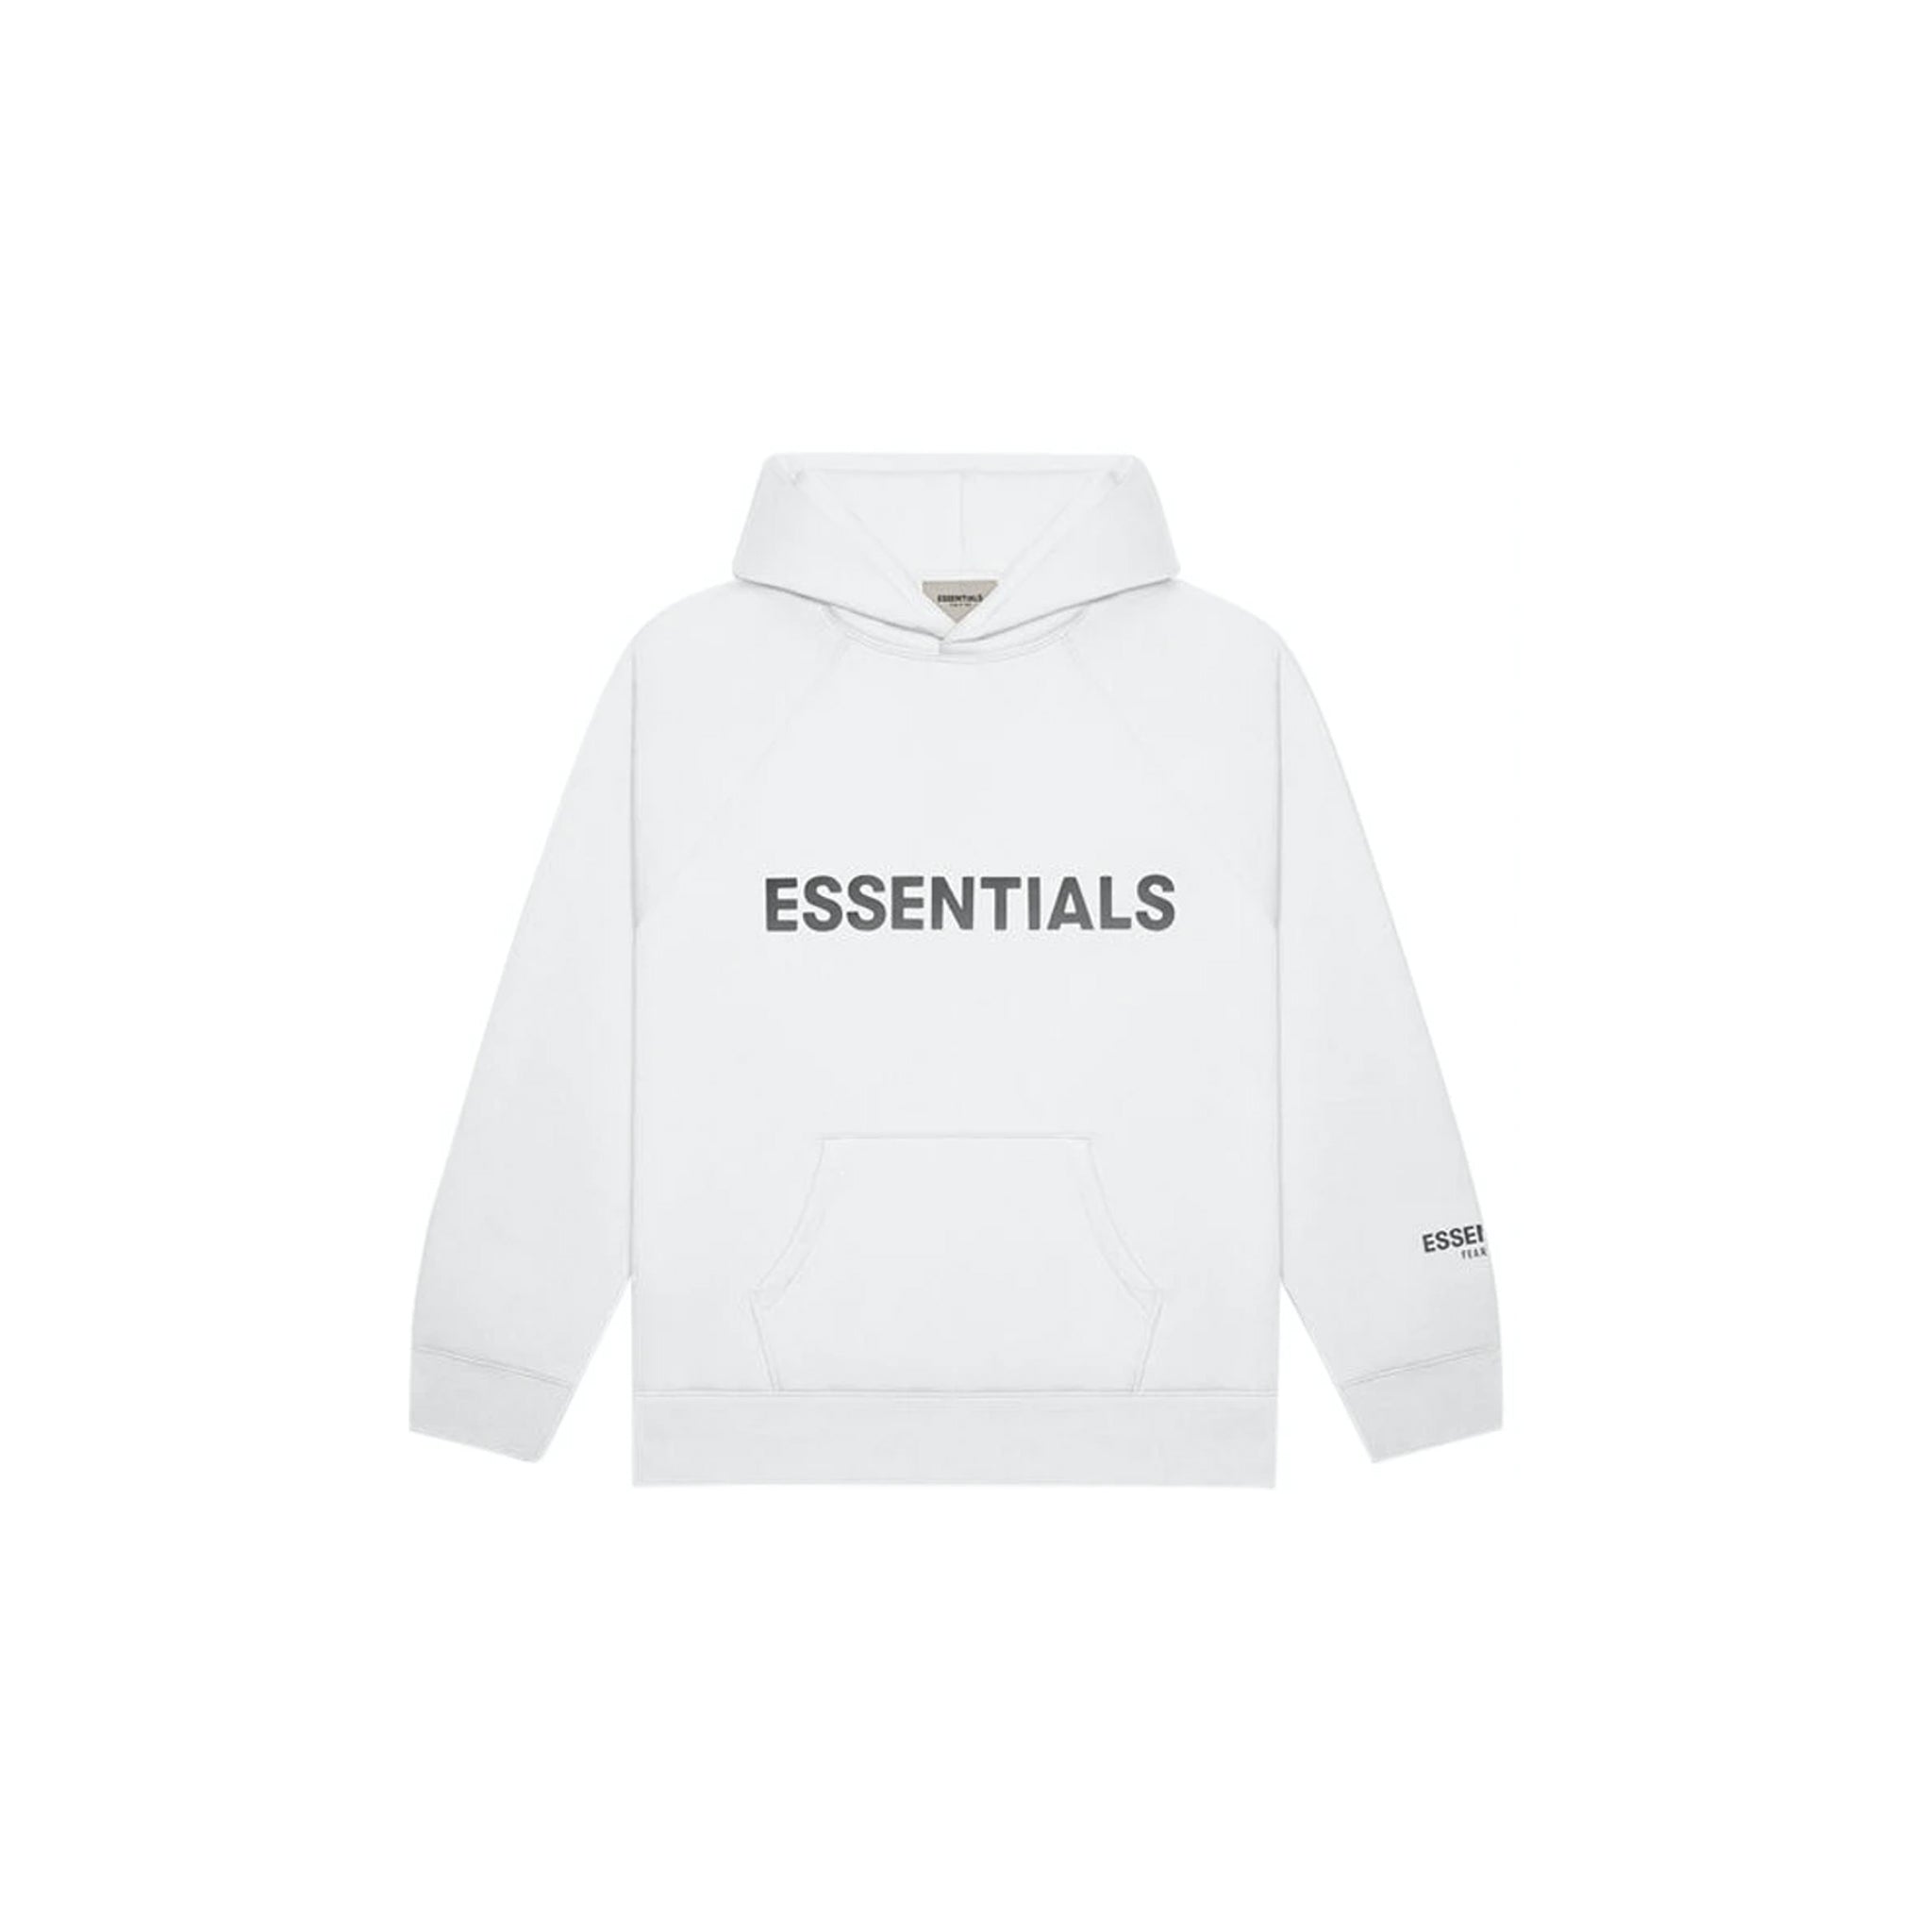 FEAR OF GOD ESSENTIALS PULLOVER HOODIE APPLIQUE LOGO (SS20) WHITE